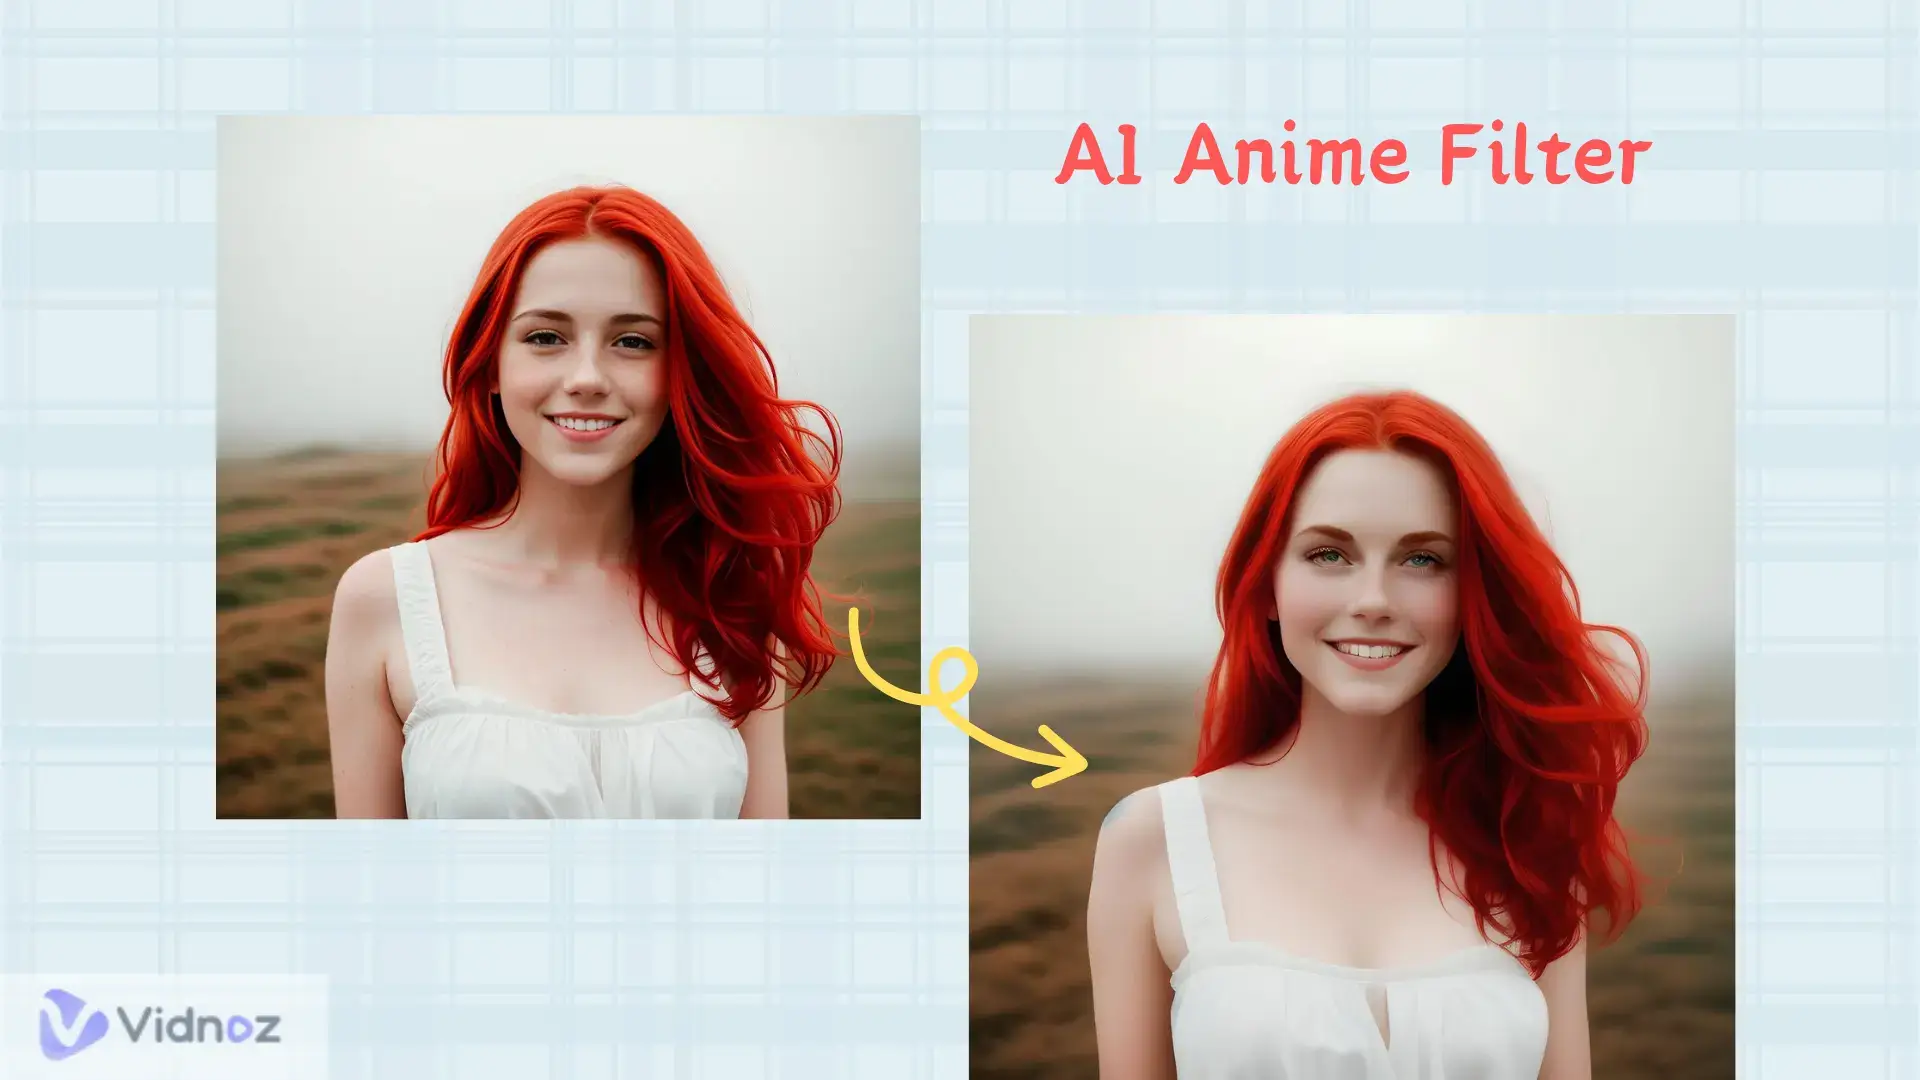 Top 6 Free AI Anime Filter Makers to Convert Image to Anime [Apps and Online Tools]